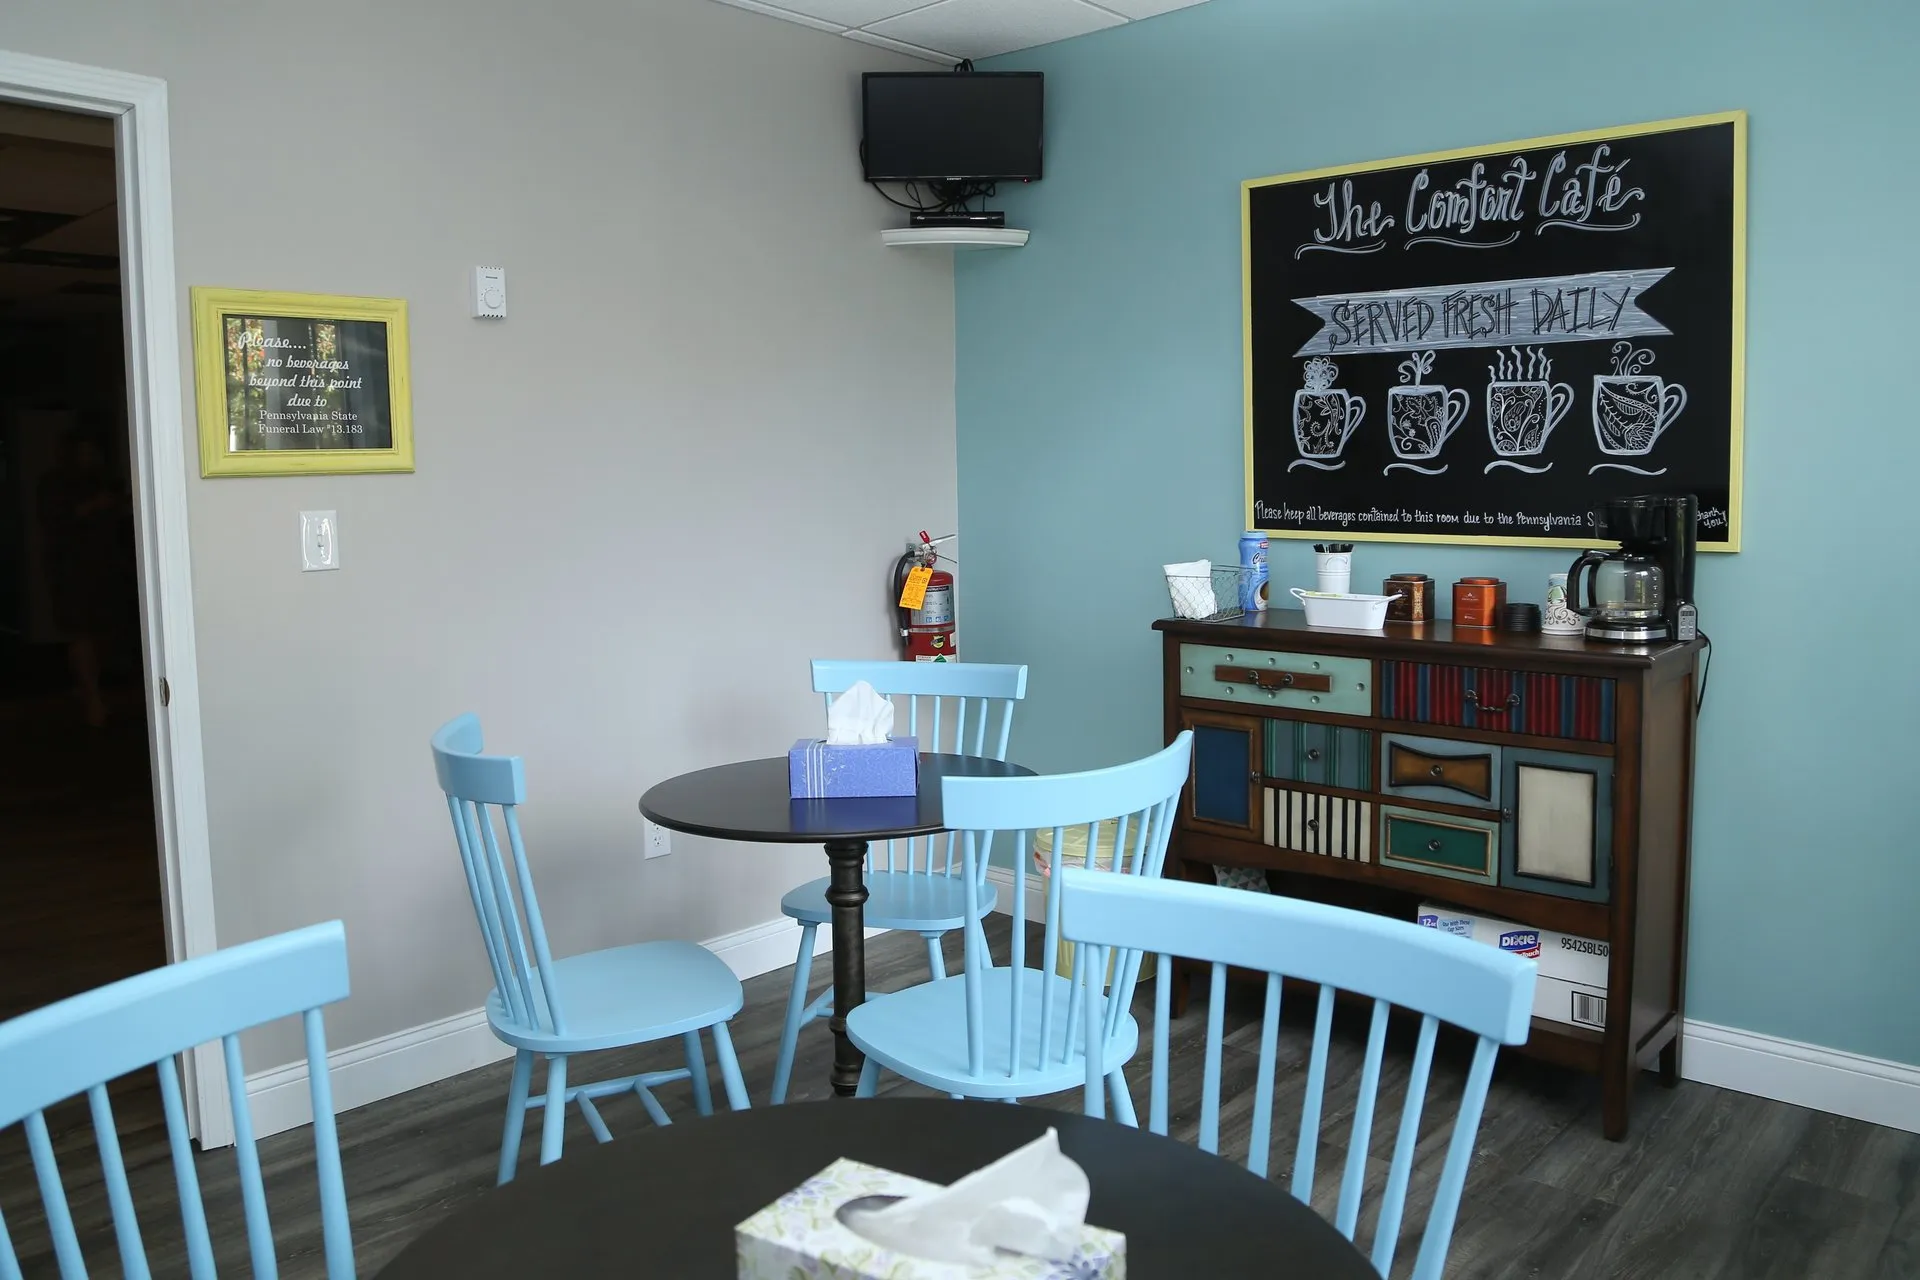 funeral home facilities cafe with pastel colored chairs